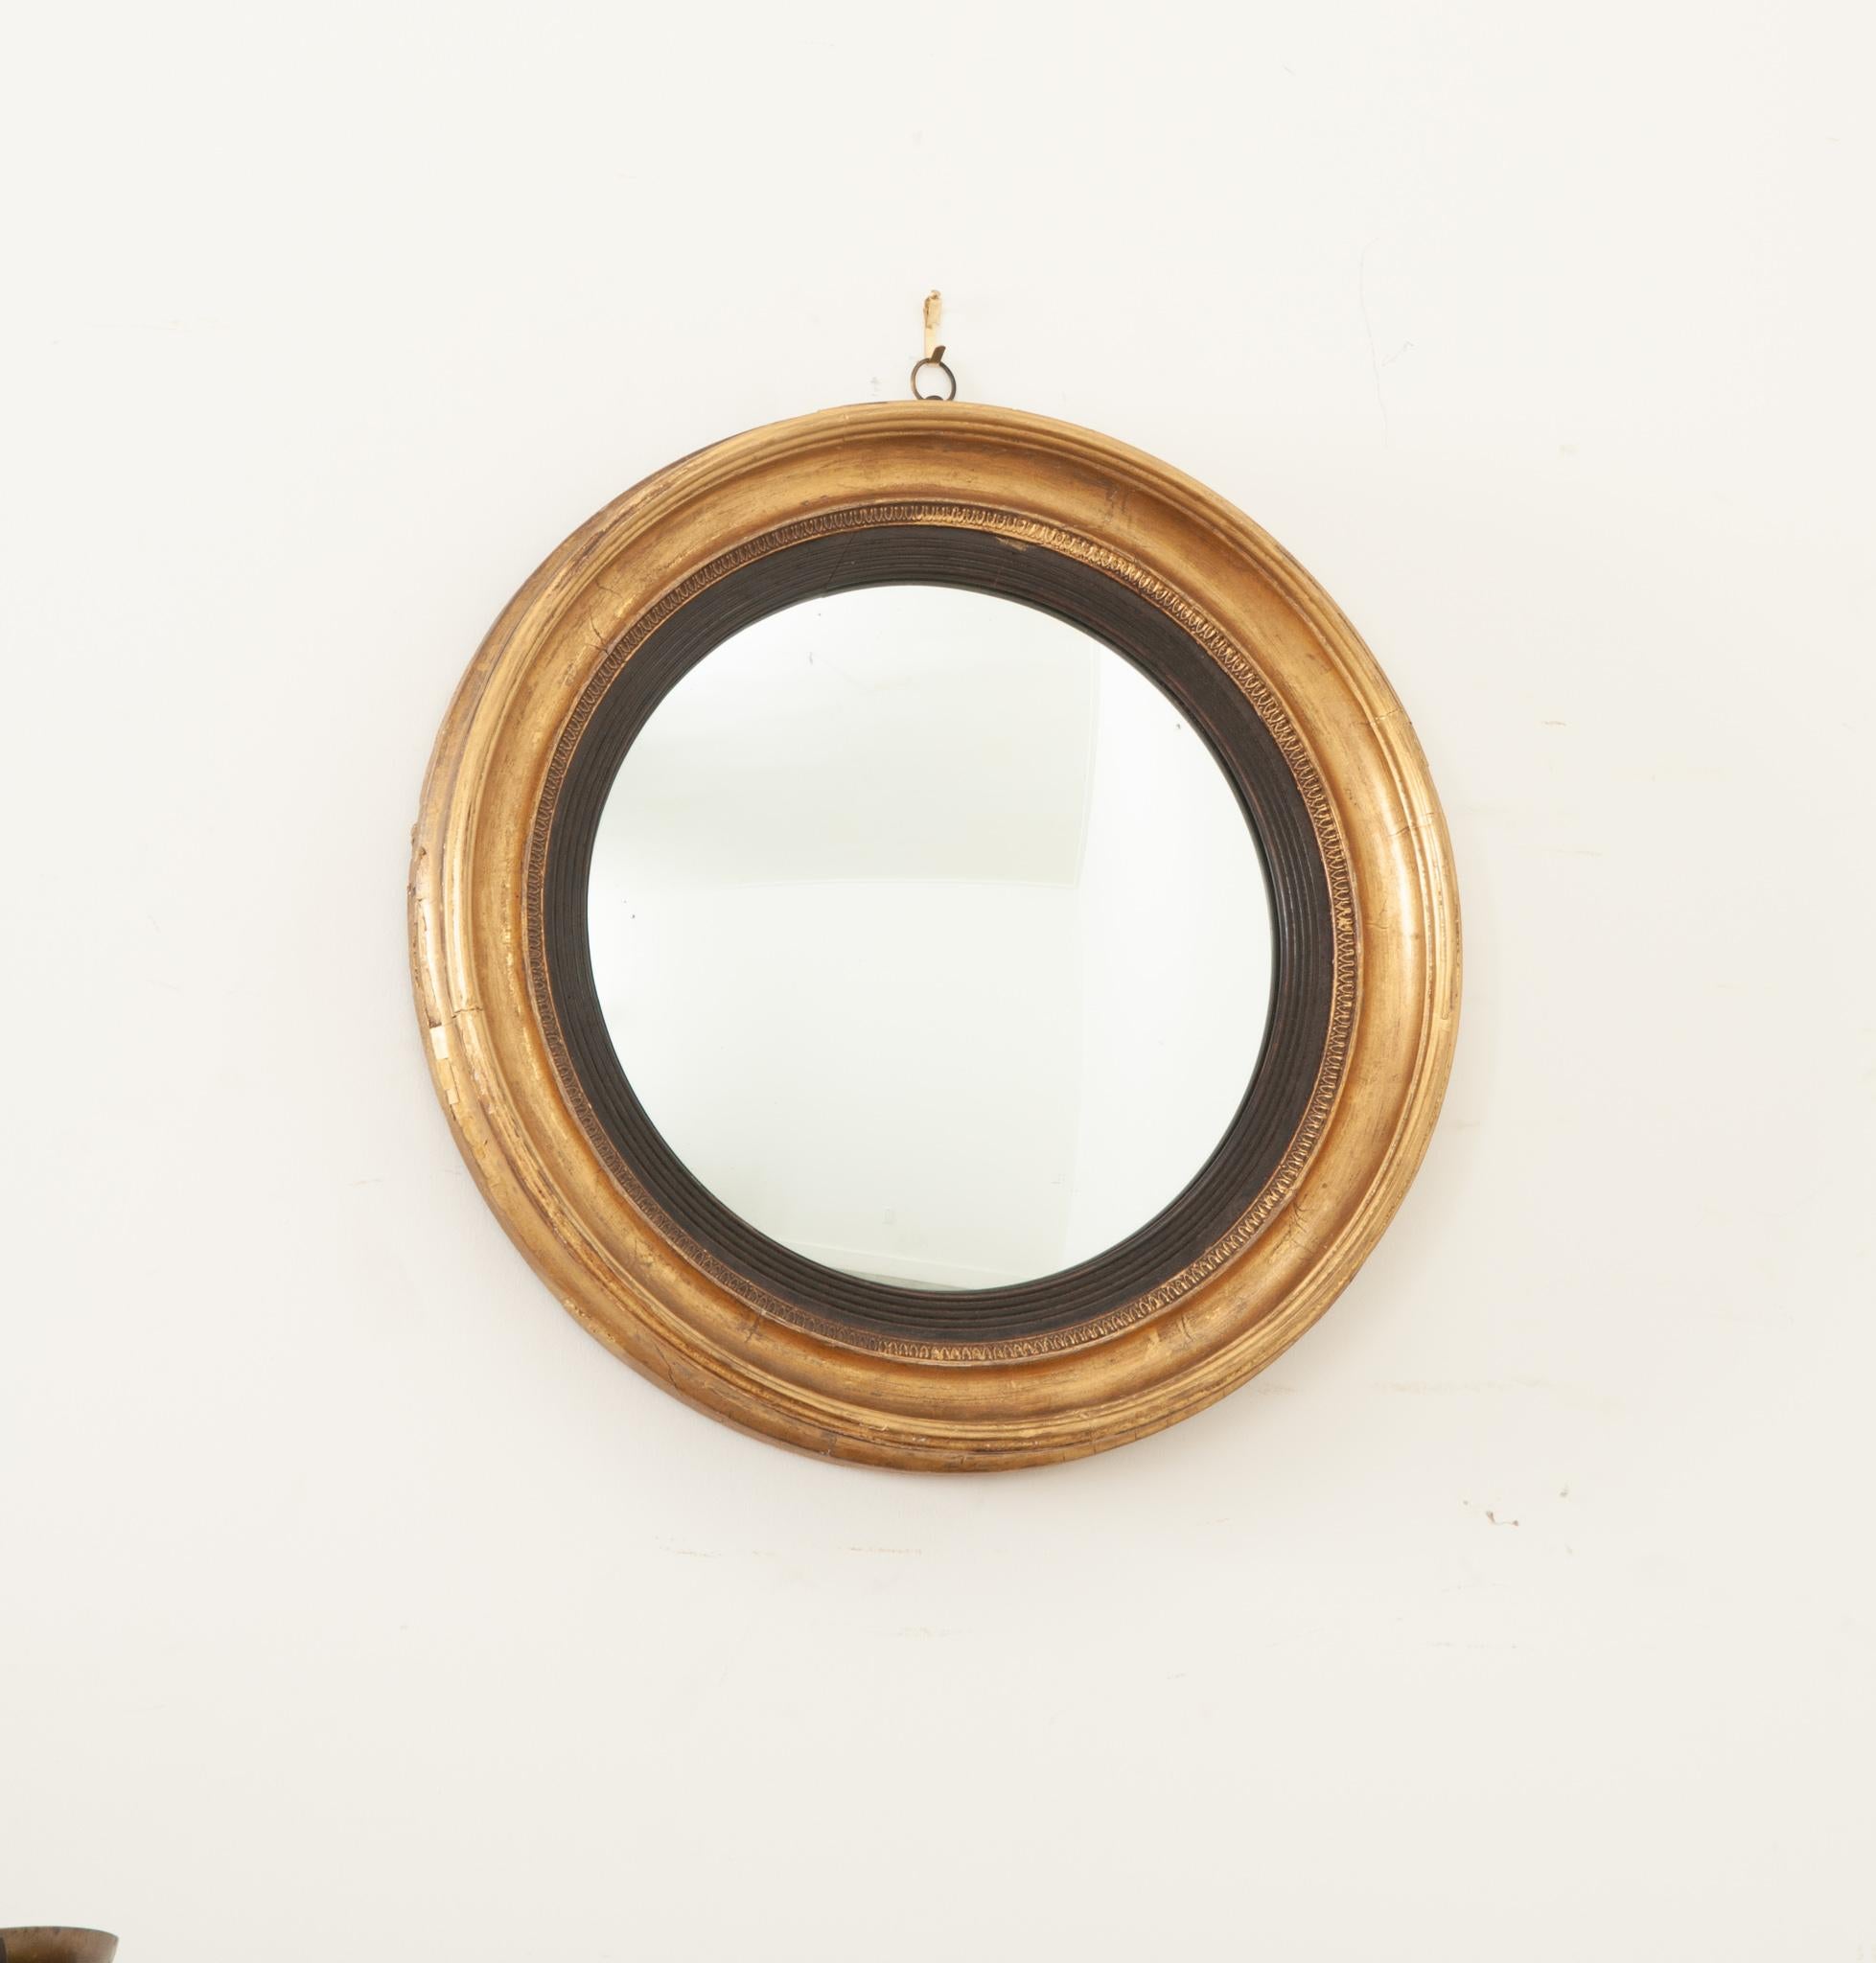 A handsome convex mirror crafted in England during the 1820’s at the end of the Georgian era. The round molded gold gilt frame has a lovely patina and secures the antique mirror plate firmly. The mirror has a slight convex and a clear reflection